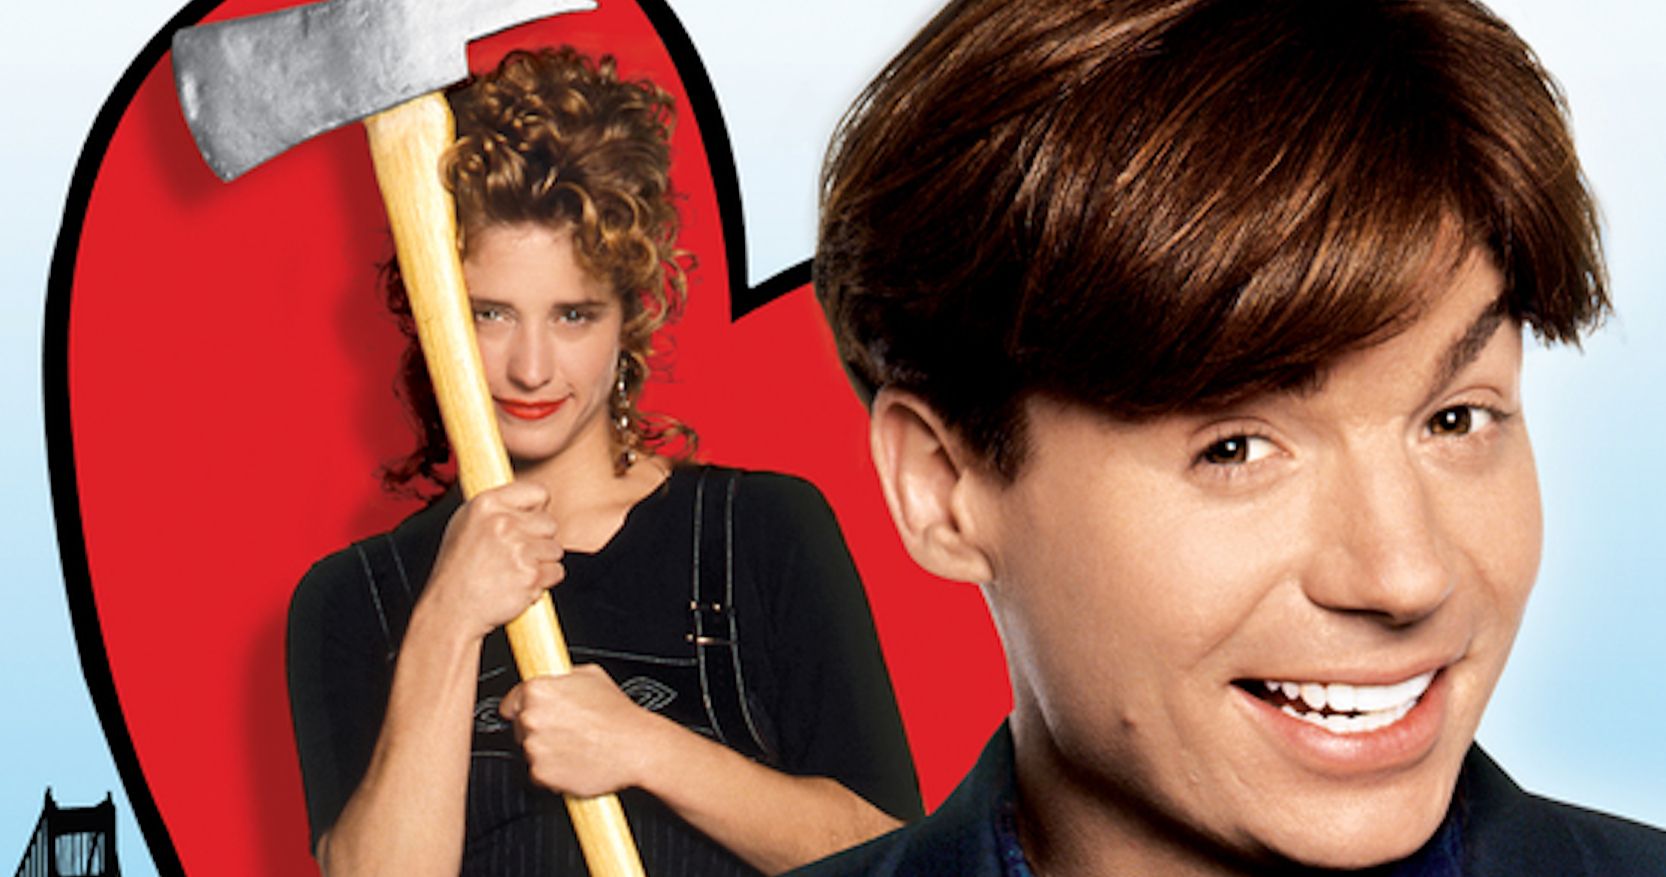 Mike Myers Will Play 7 Characters in Netflix's So I Married an Axe Murderer Spinoff The Pentaverate